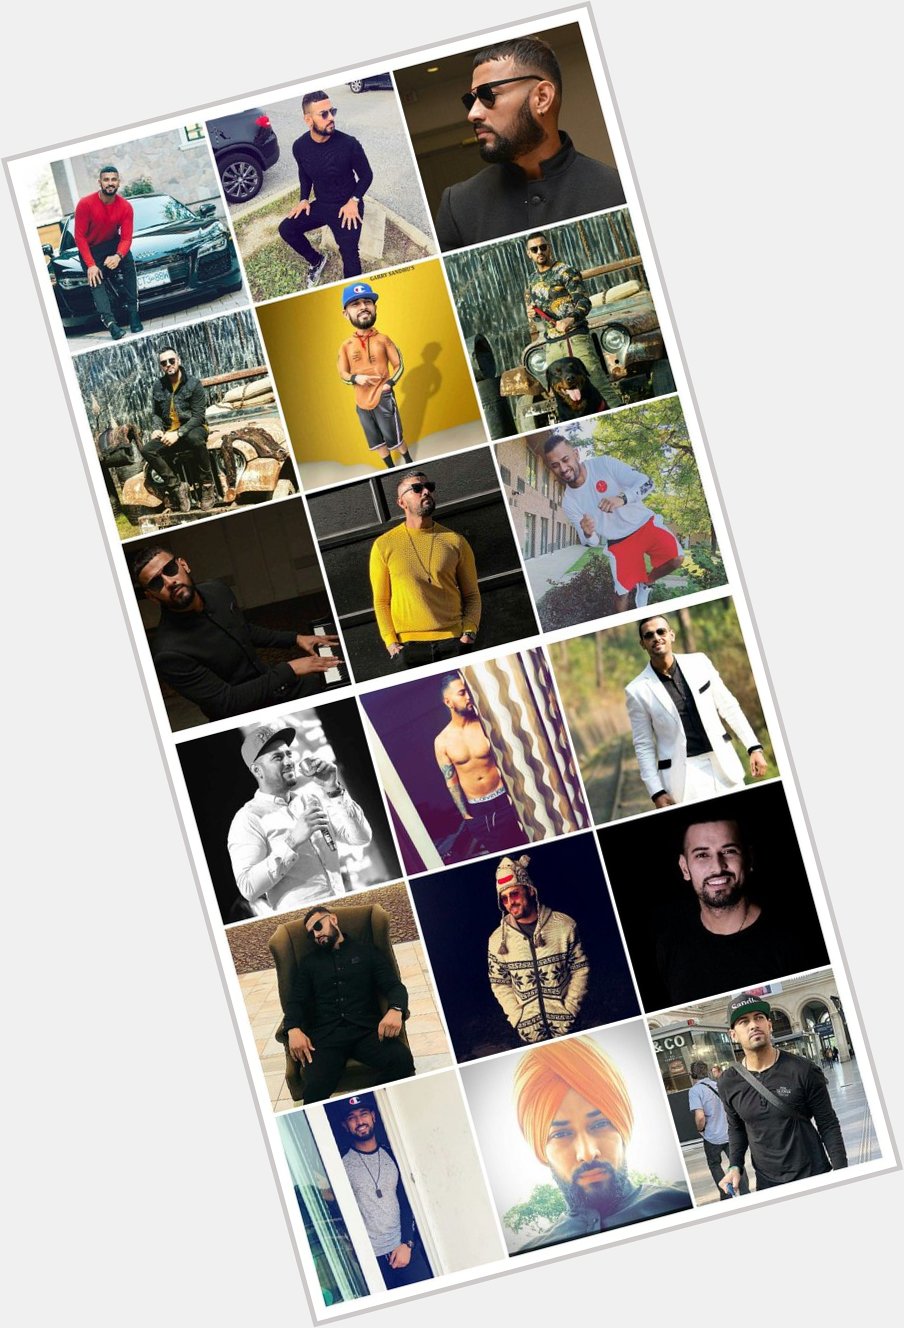 You have a voice that can make millions of people listen,
keep sharing your gift
HaPpY BiRtHdAy Garry Sandhu 